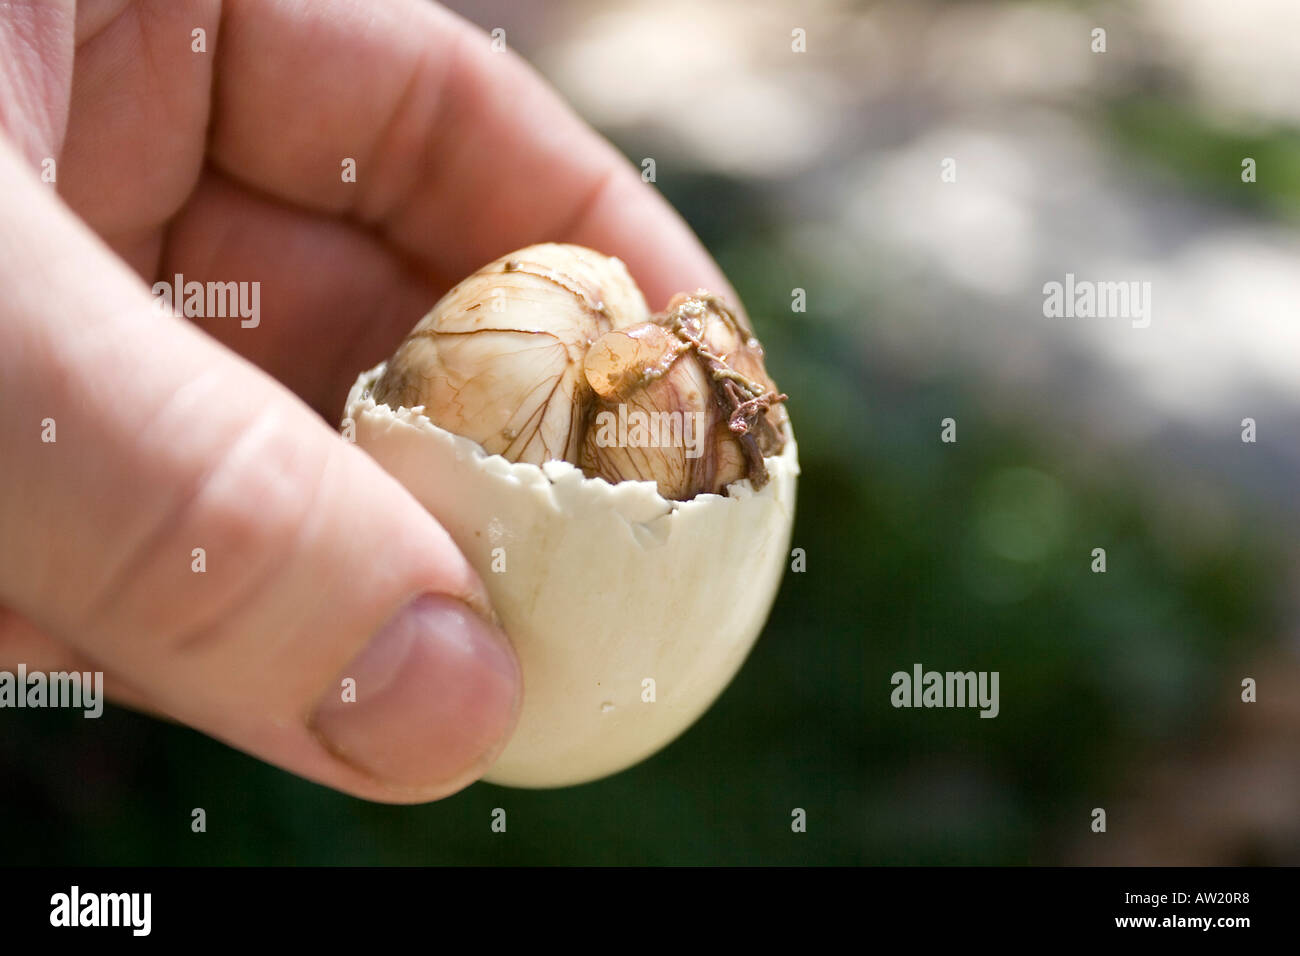 Balut ( duck's egg brood for about 17 days), delicacy on the Philippines Stock Photo